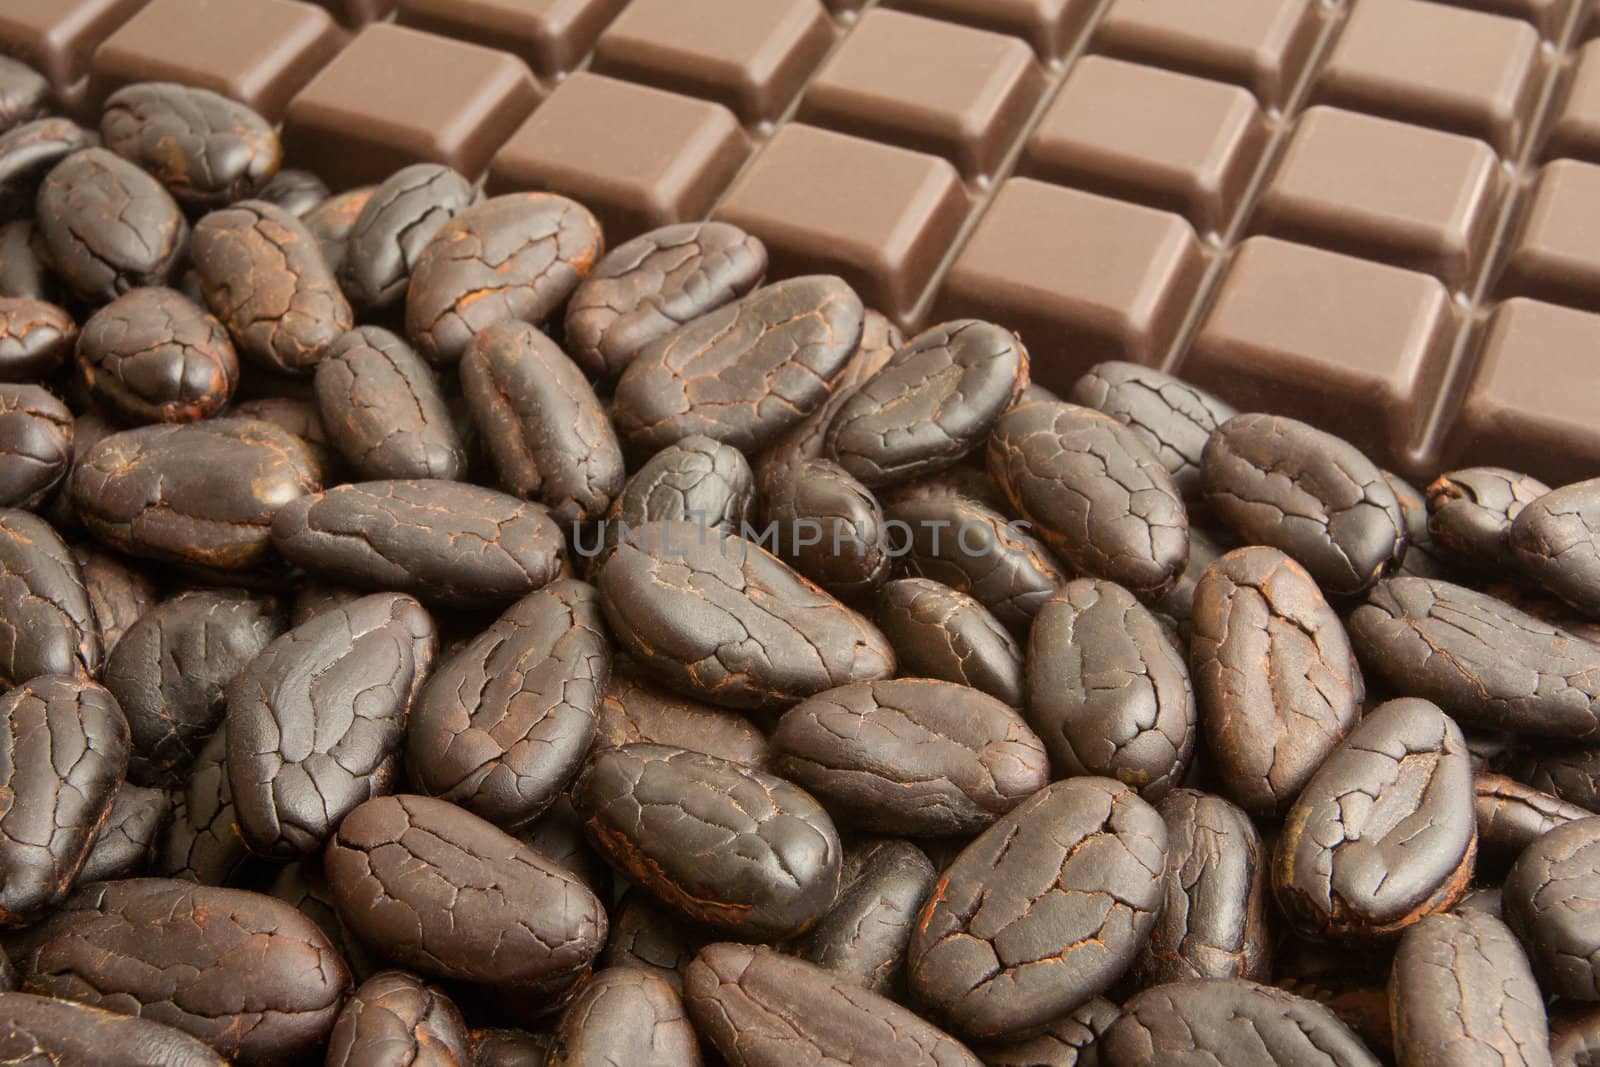 Bar of chocolate, and cocoa beans